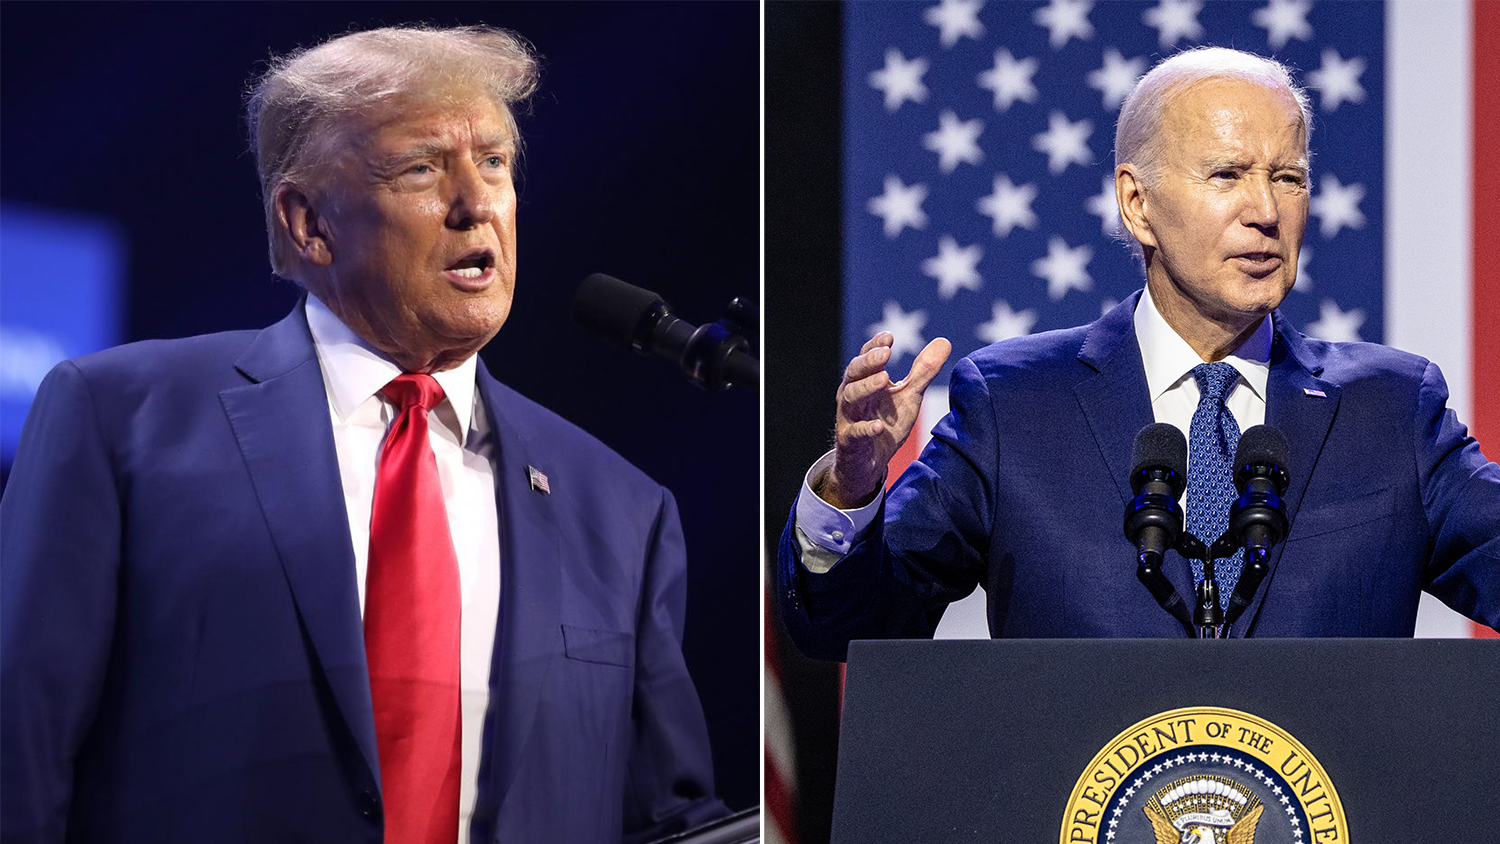  Trump and Biden's campaigns turn the focus to Arizona after it passes restrictive abortion law 